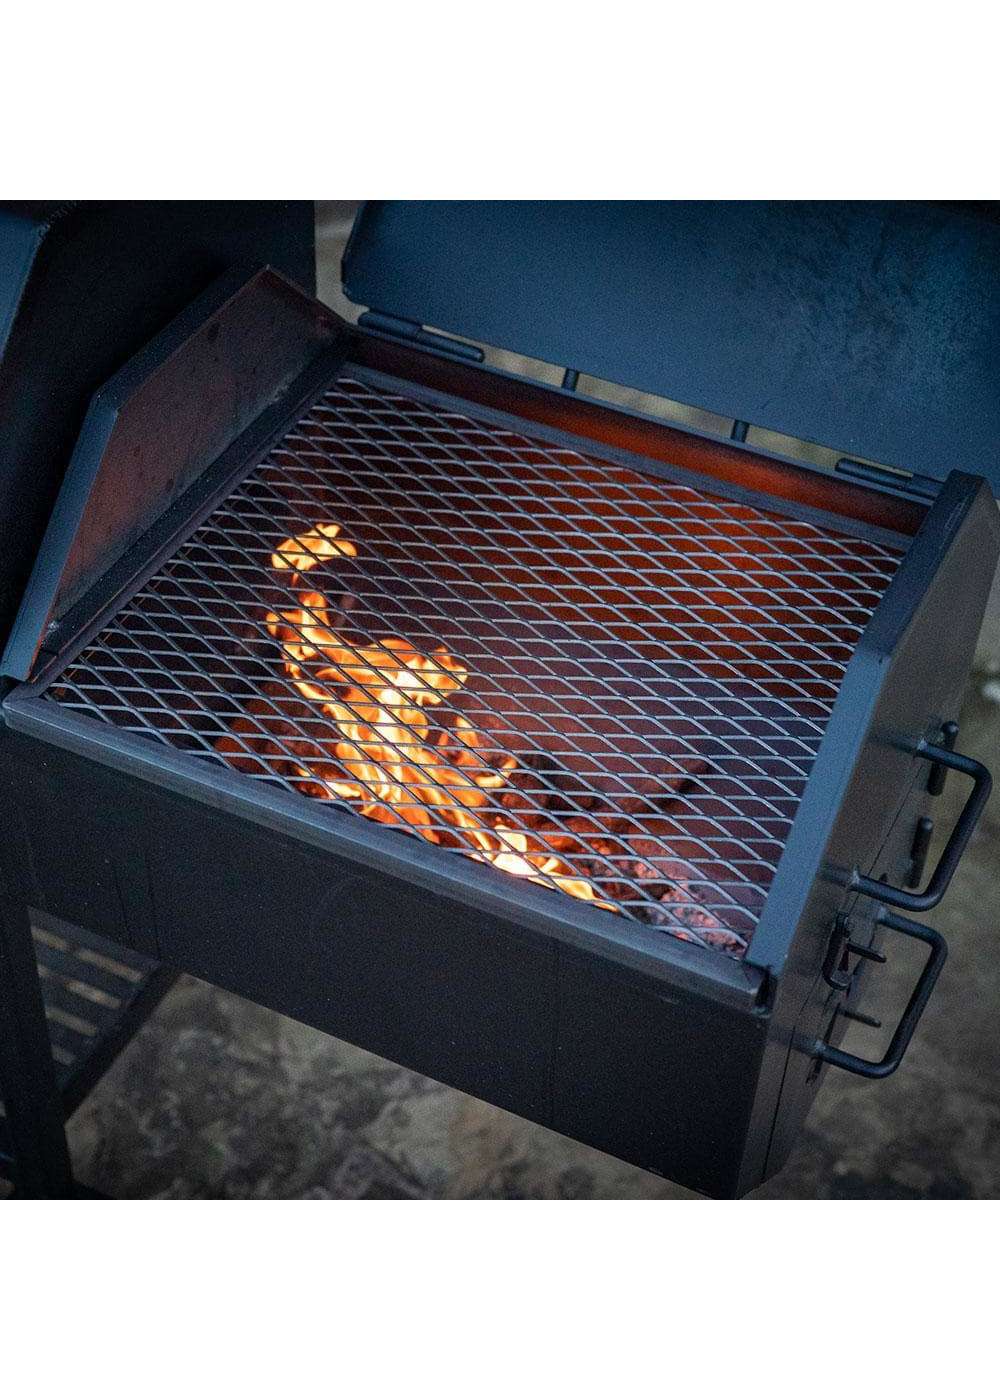 All Seasons Feeders 24" x 20" Charcoal BBQ Pit with Firebox; image 4 of 7